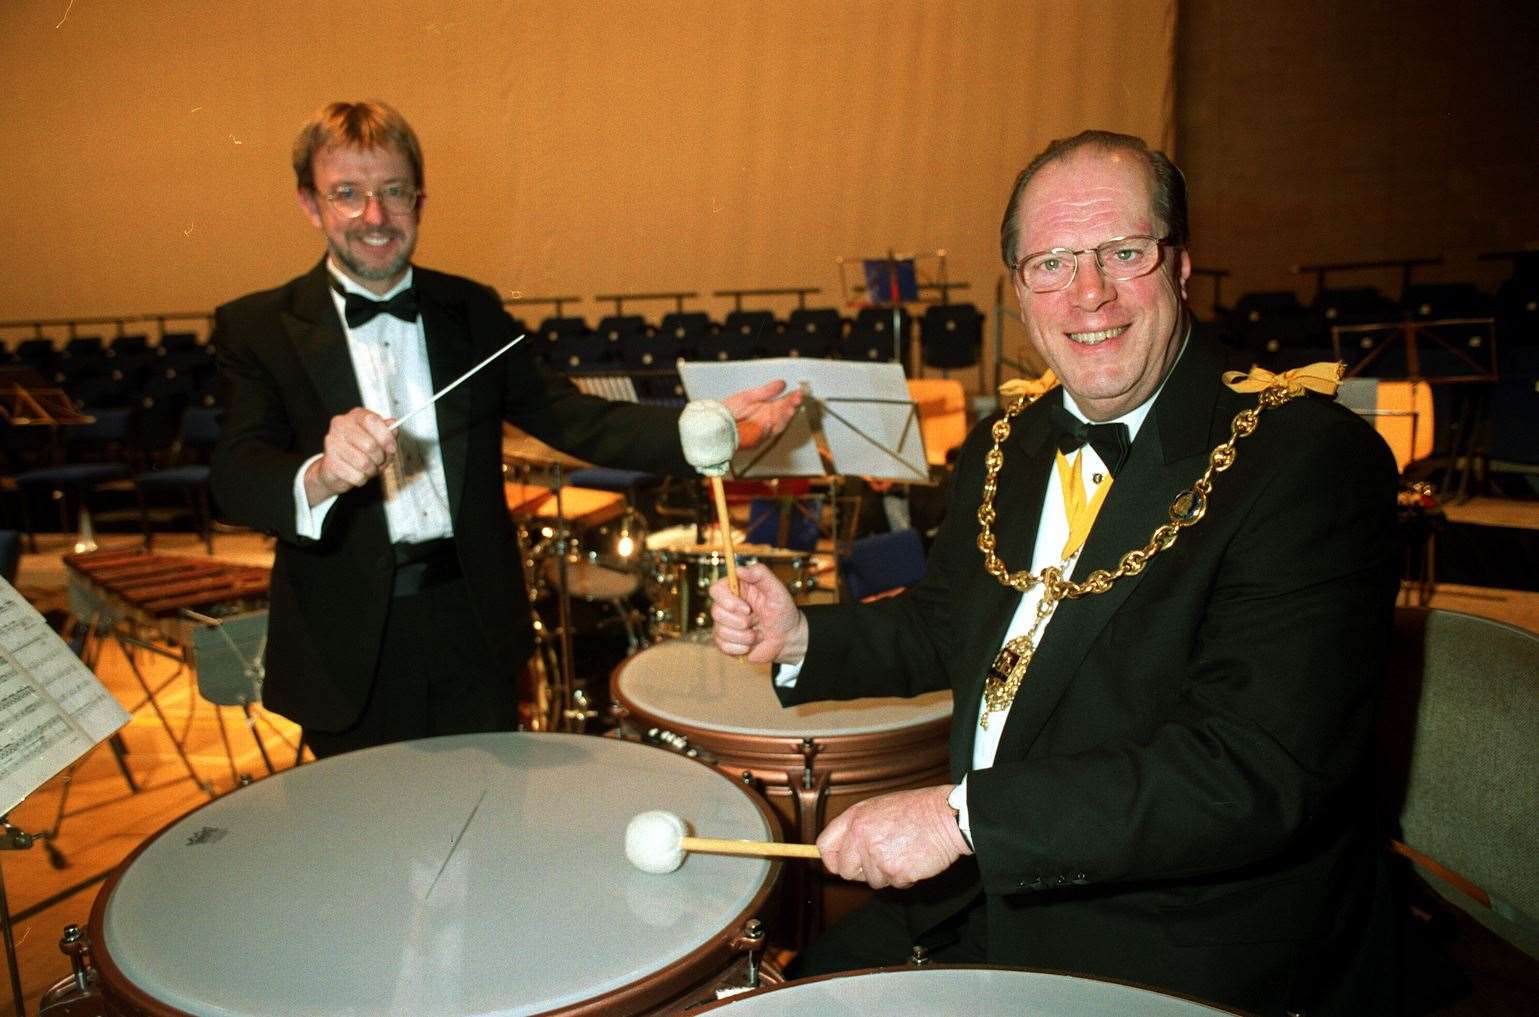 Playing the drums while Mayor of Maidstone, Cllr Daley at charity gala night